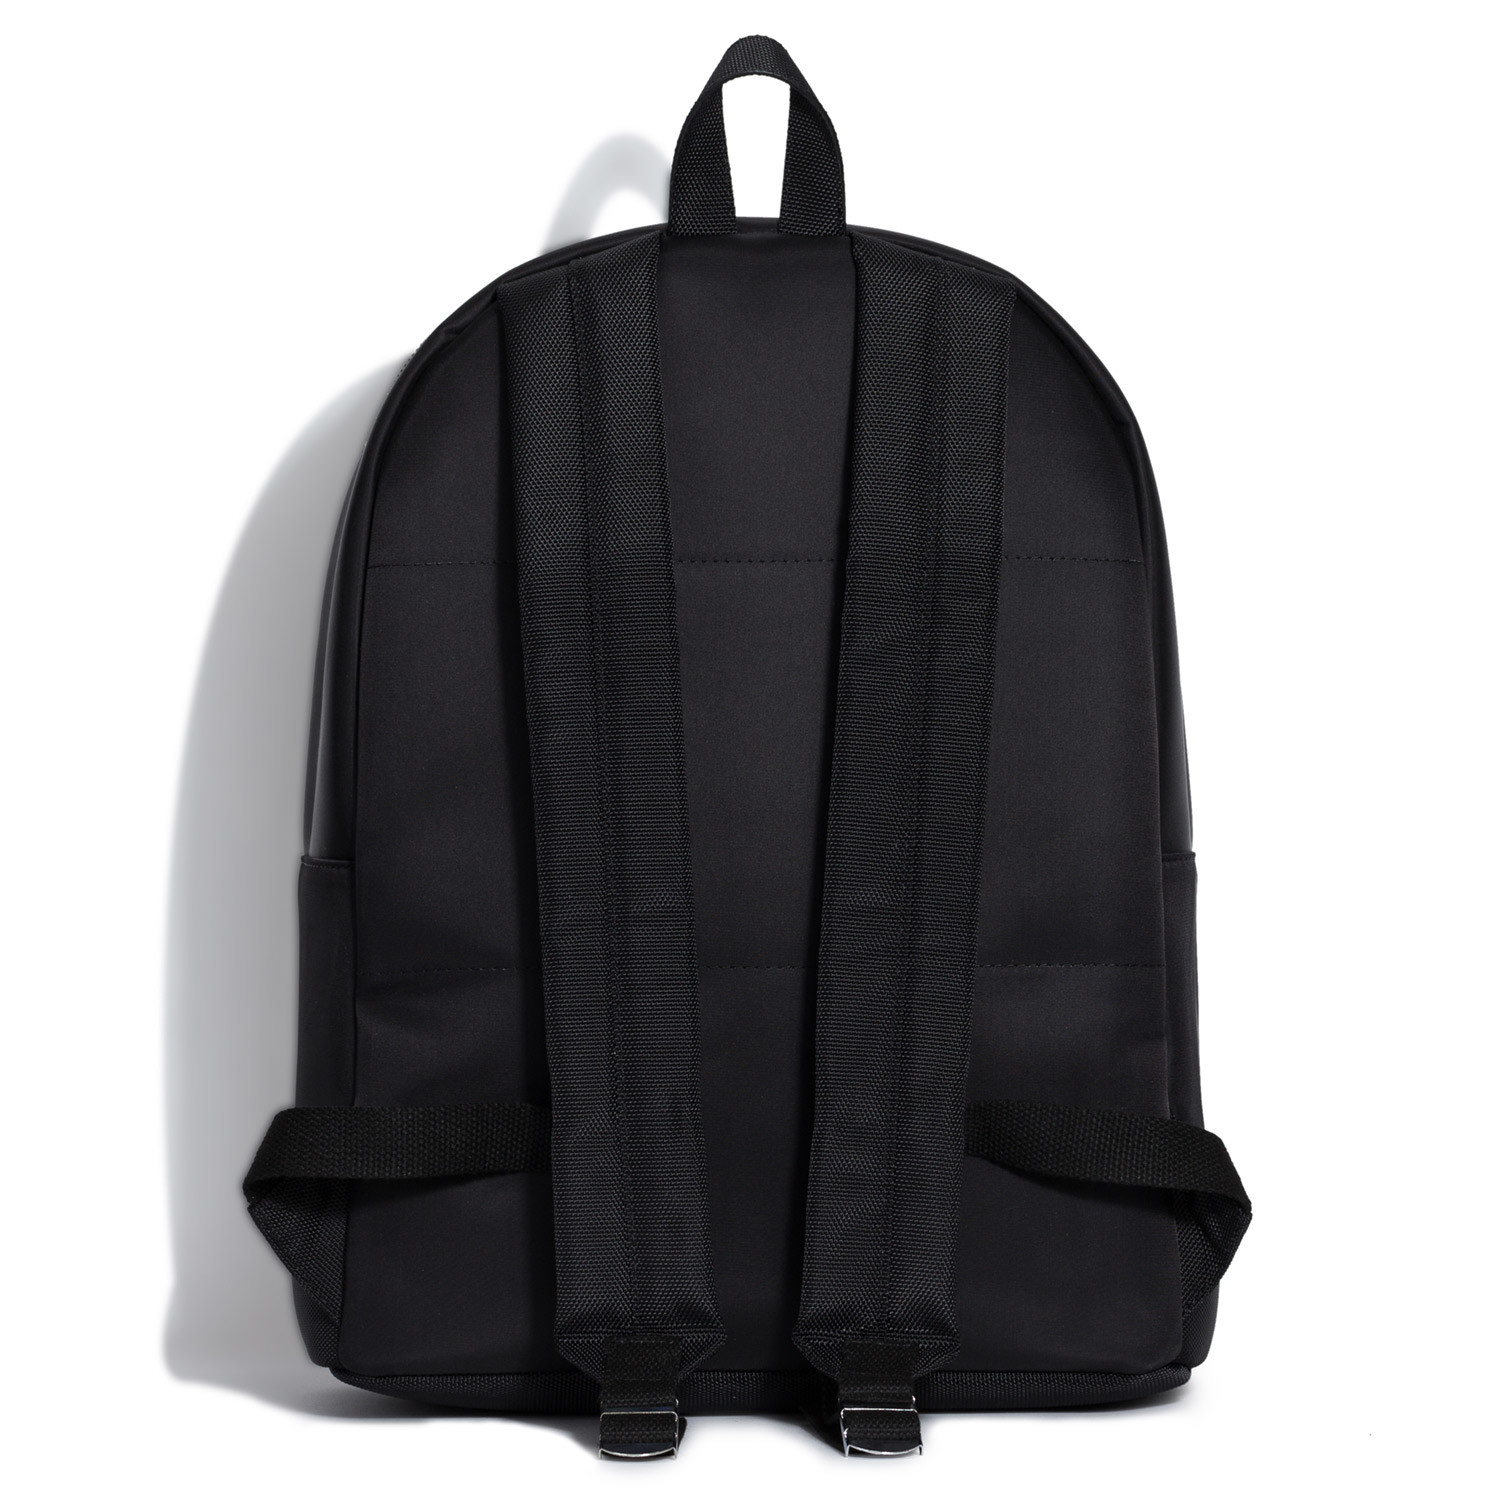 Mr Backpack // Black - Steele & Borough - Touch of Modern